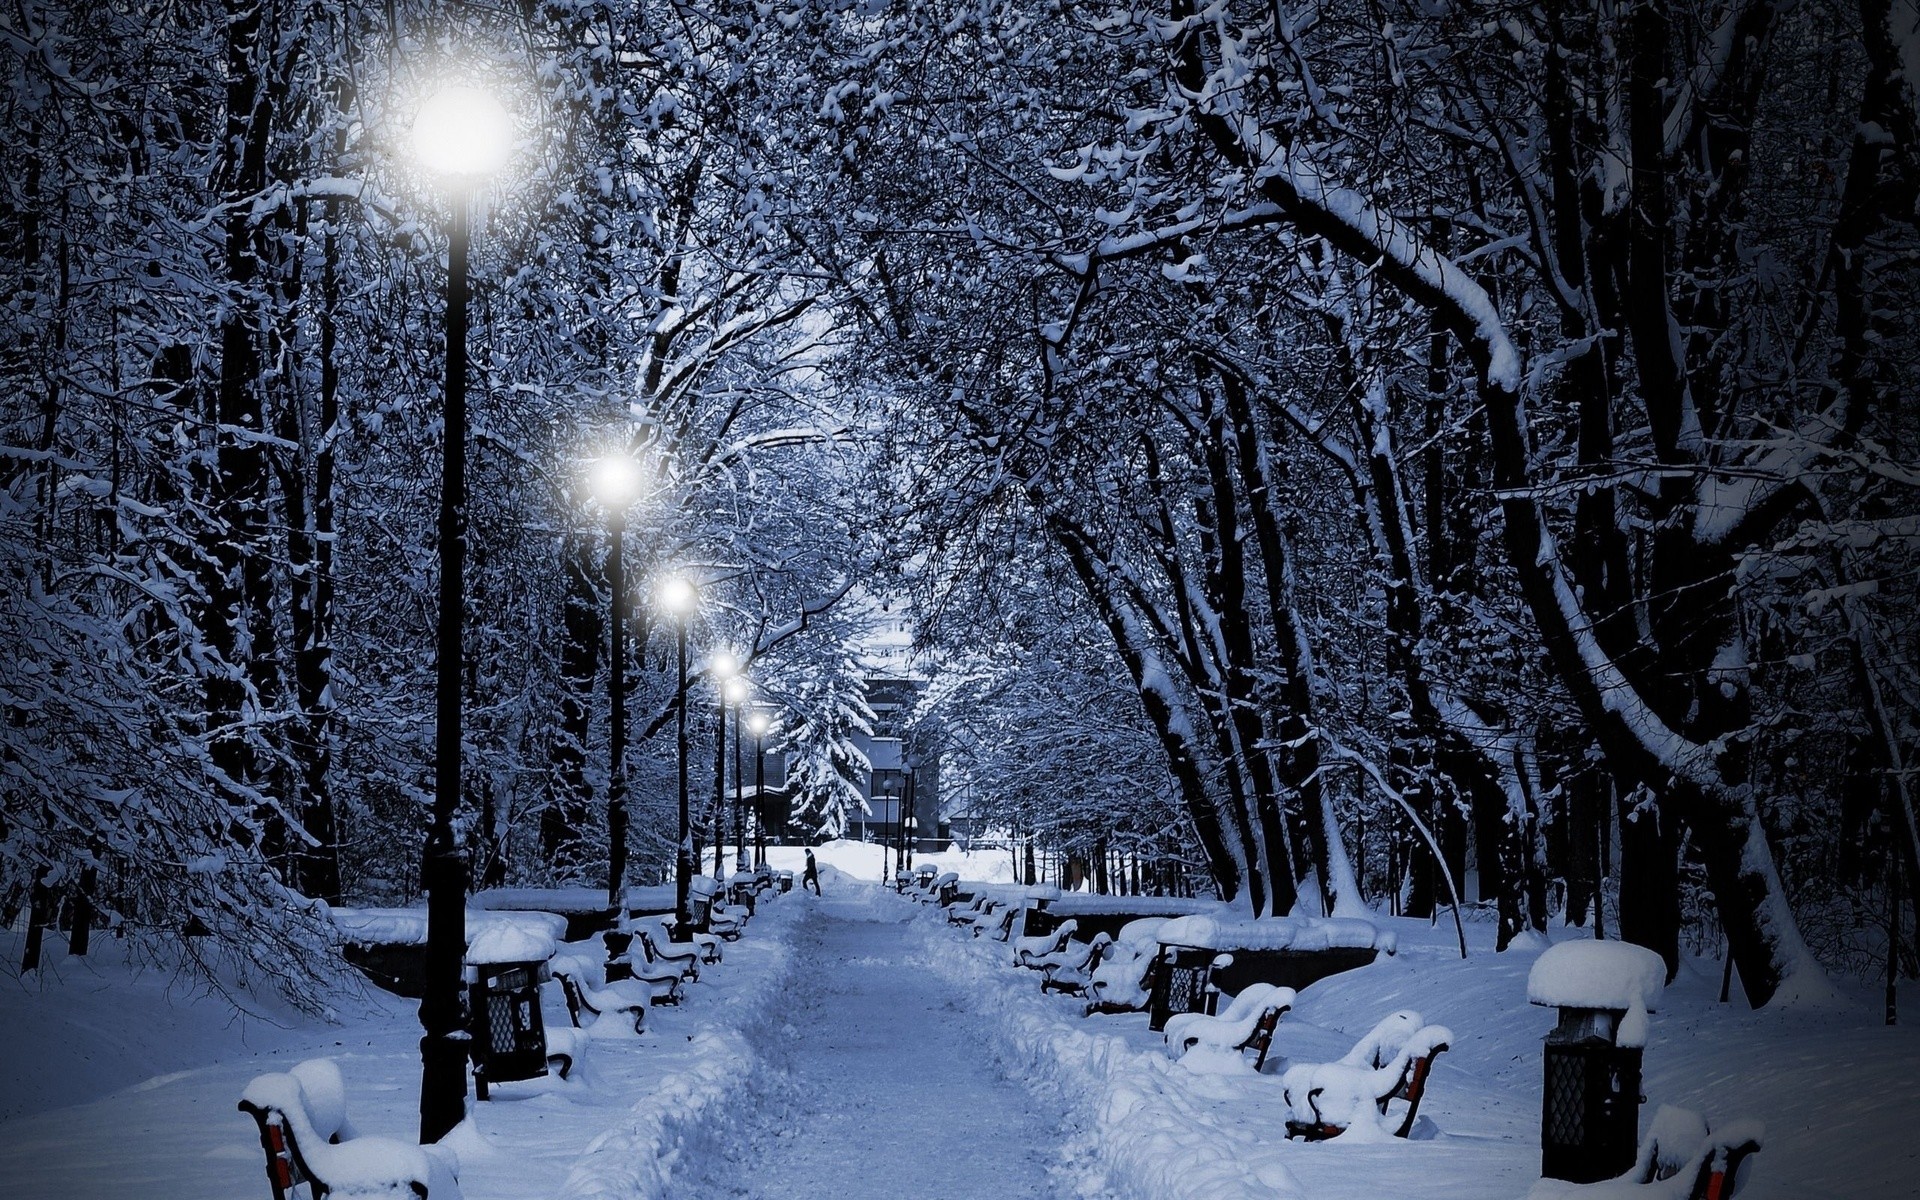 1920x1200 Landscapes nature winter snow snowflakes snowing trees park white night lights  christmas wallpaper |  | 24142 | WallpaperUP